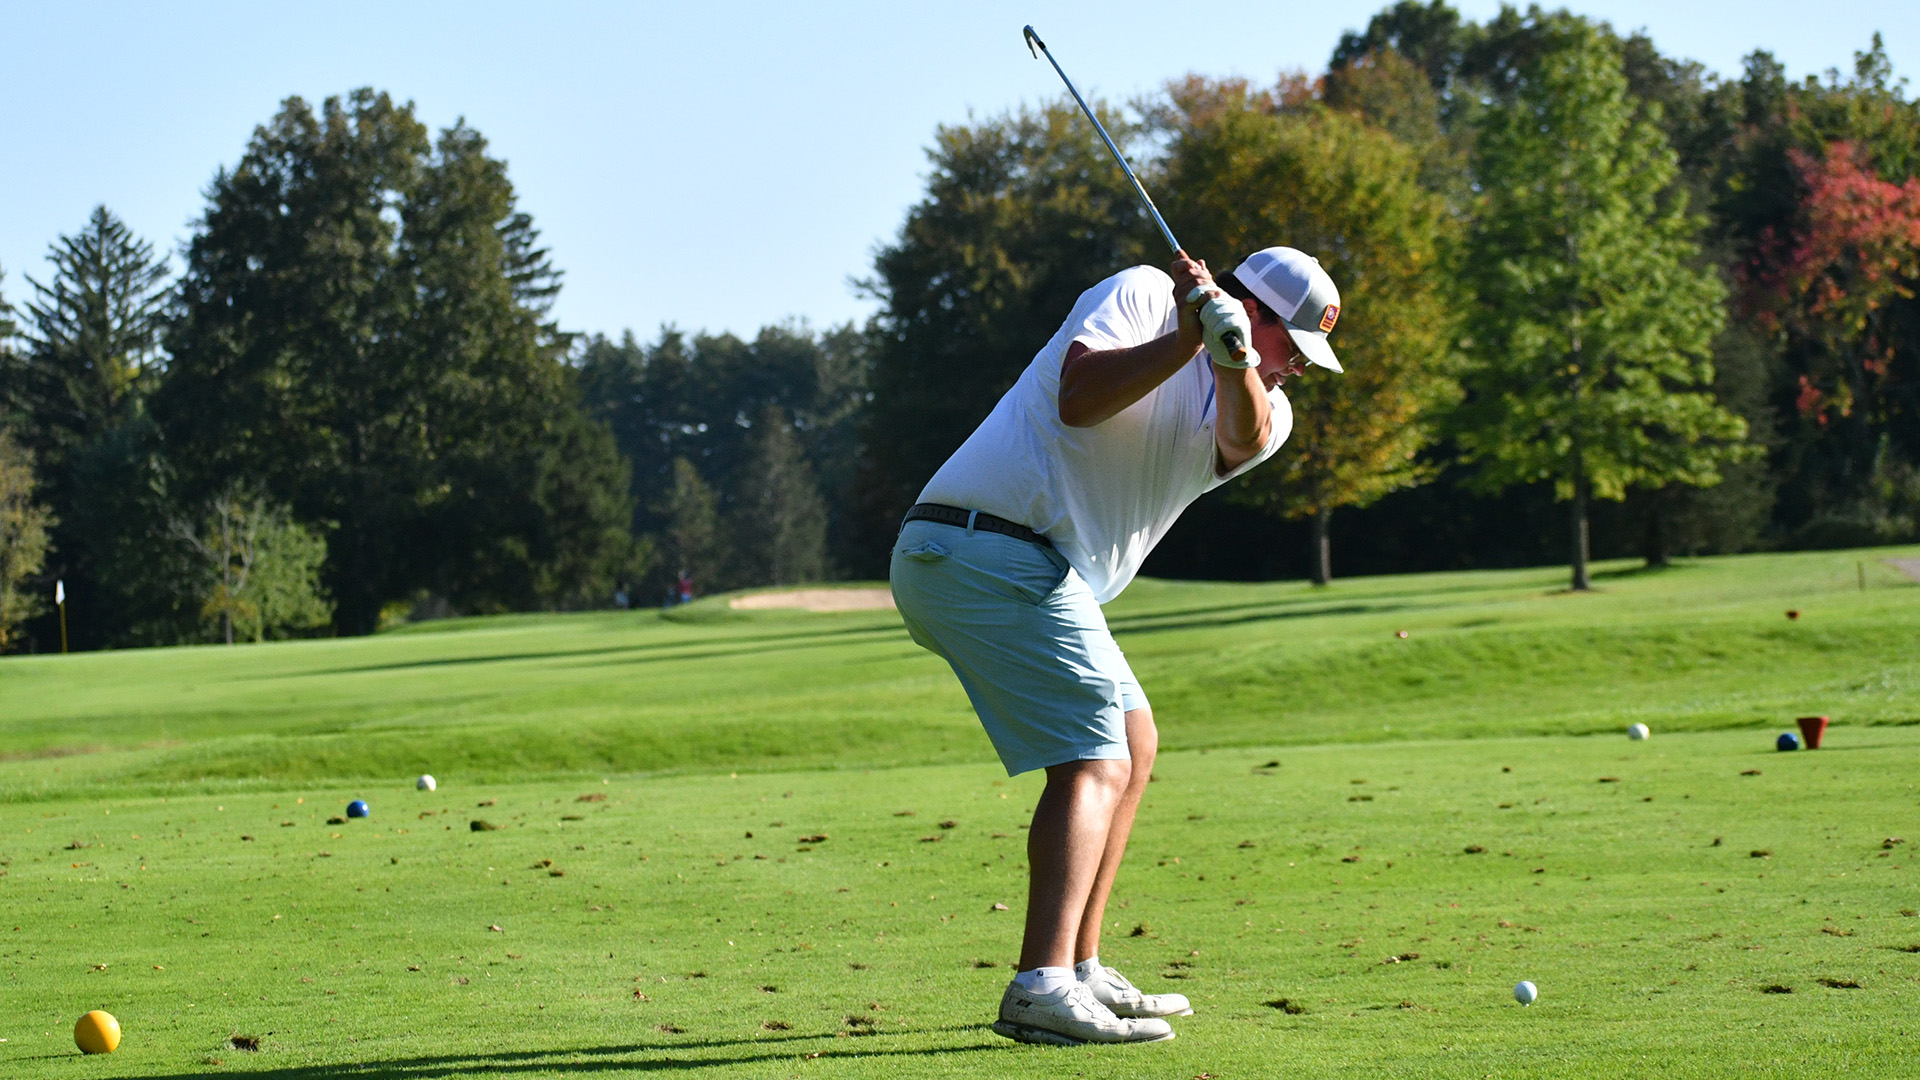 Post in 1st After Day 1 of Golf Championship | GBC's McGee 1st in Individual Standings